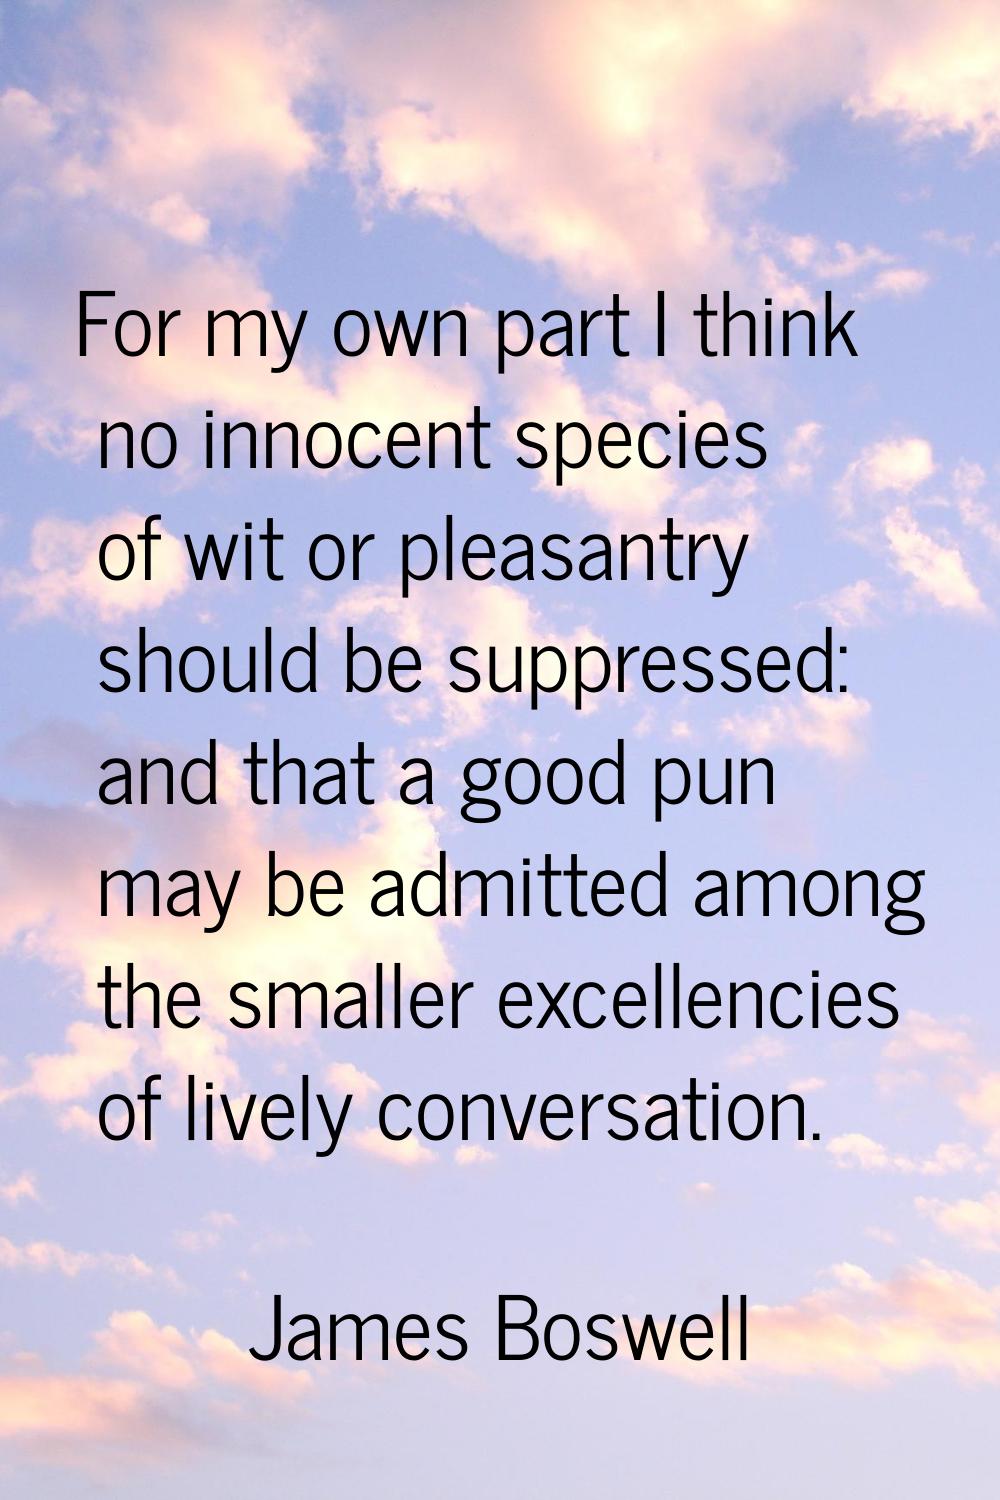 For my own part I think no innocent species of wit or pleasantry should be suppressed: and that a g